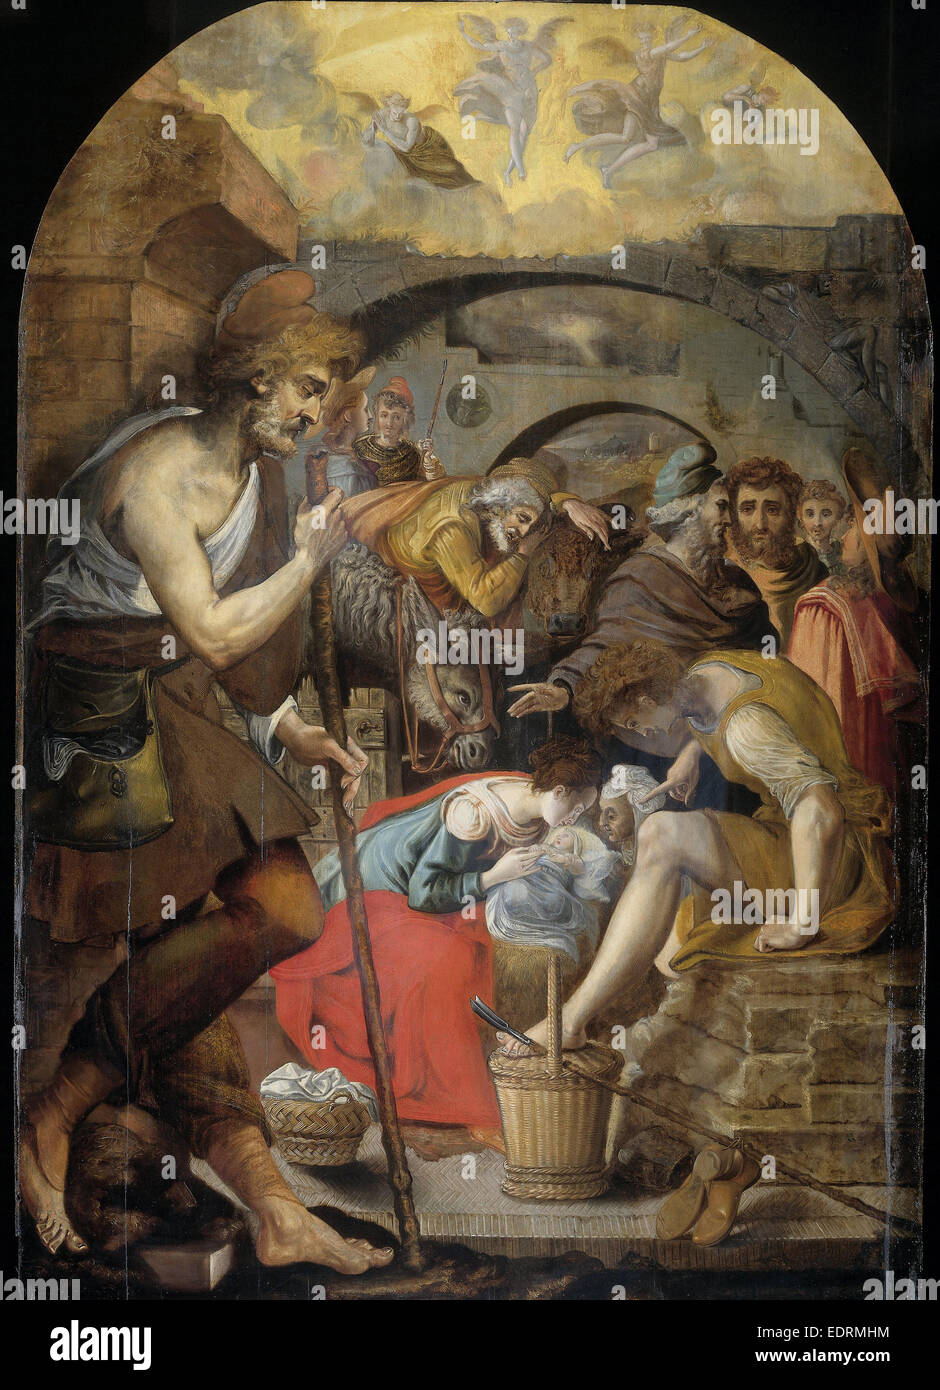 Adoration of the Shepherds, Anthonie Blocklandt, 1560 - 1572 Stock Photo